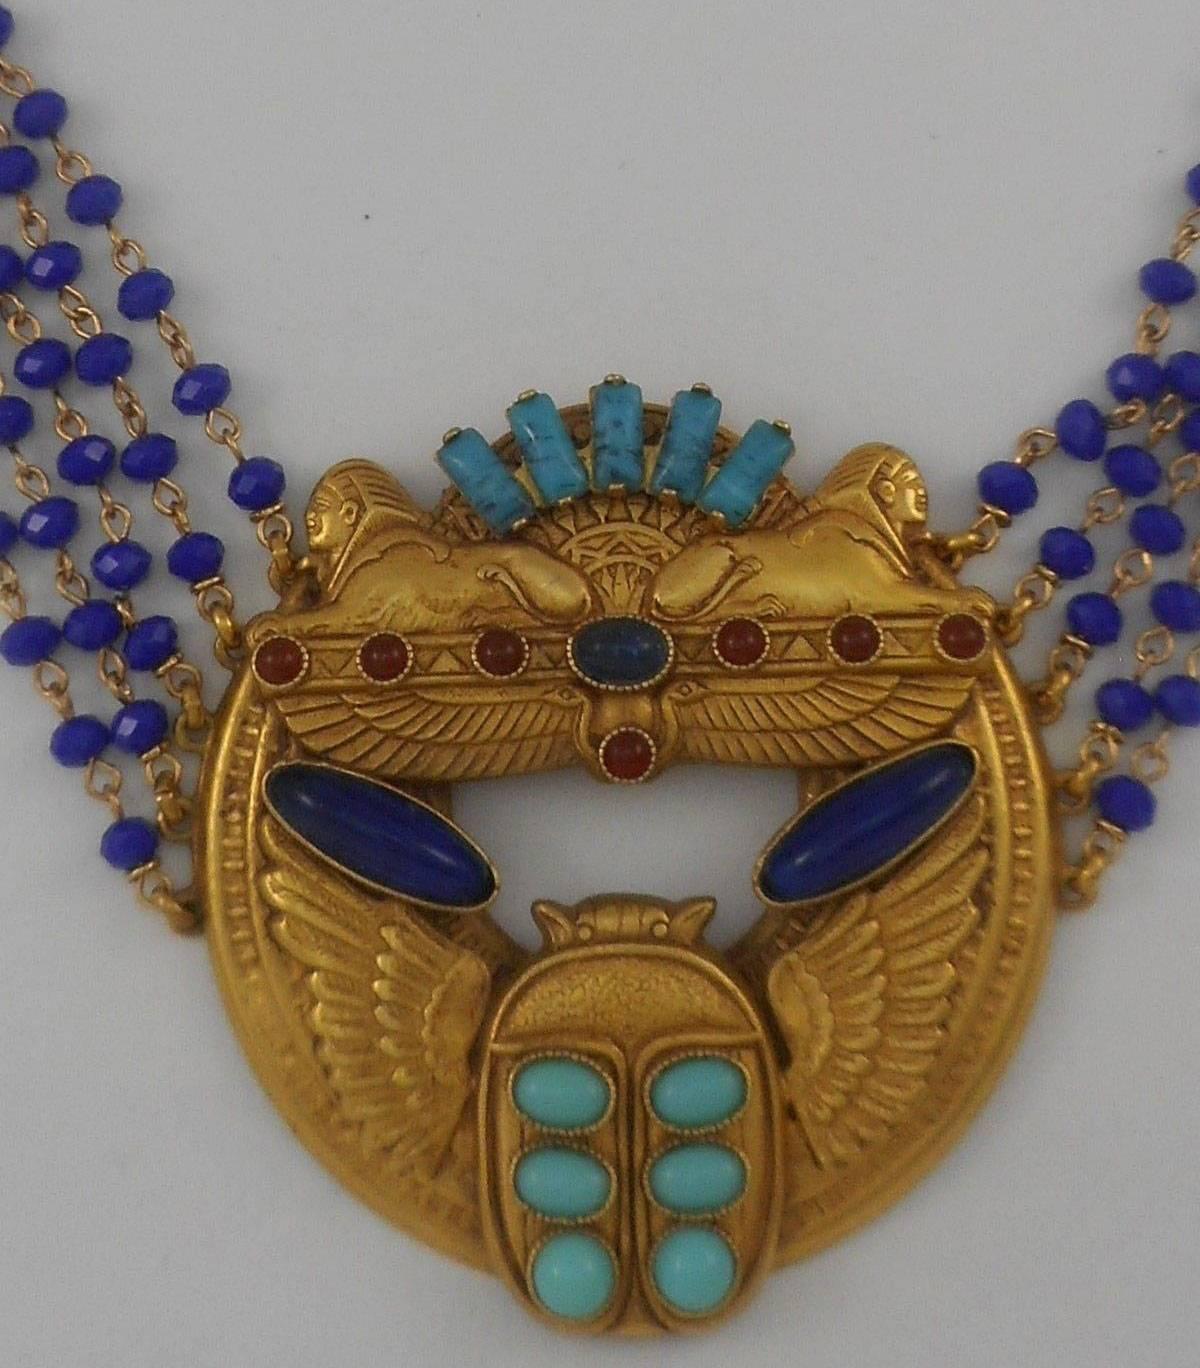 Spectacular signed Askew London 'Egyptian Revival' Medallion Necklace...showcasing antiqued Gold plated Brass medallion base decorated with Sphinxes and a winged Scarab, suspended from 5 rows of pinned 4mm blue glass Cushion shaped beads, finishing